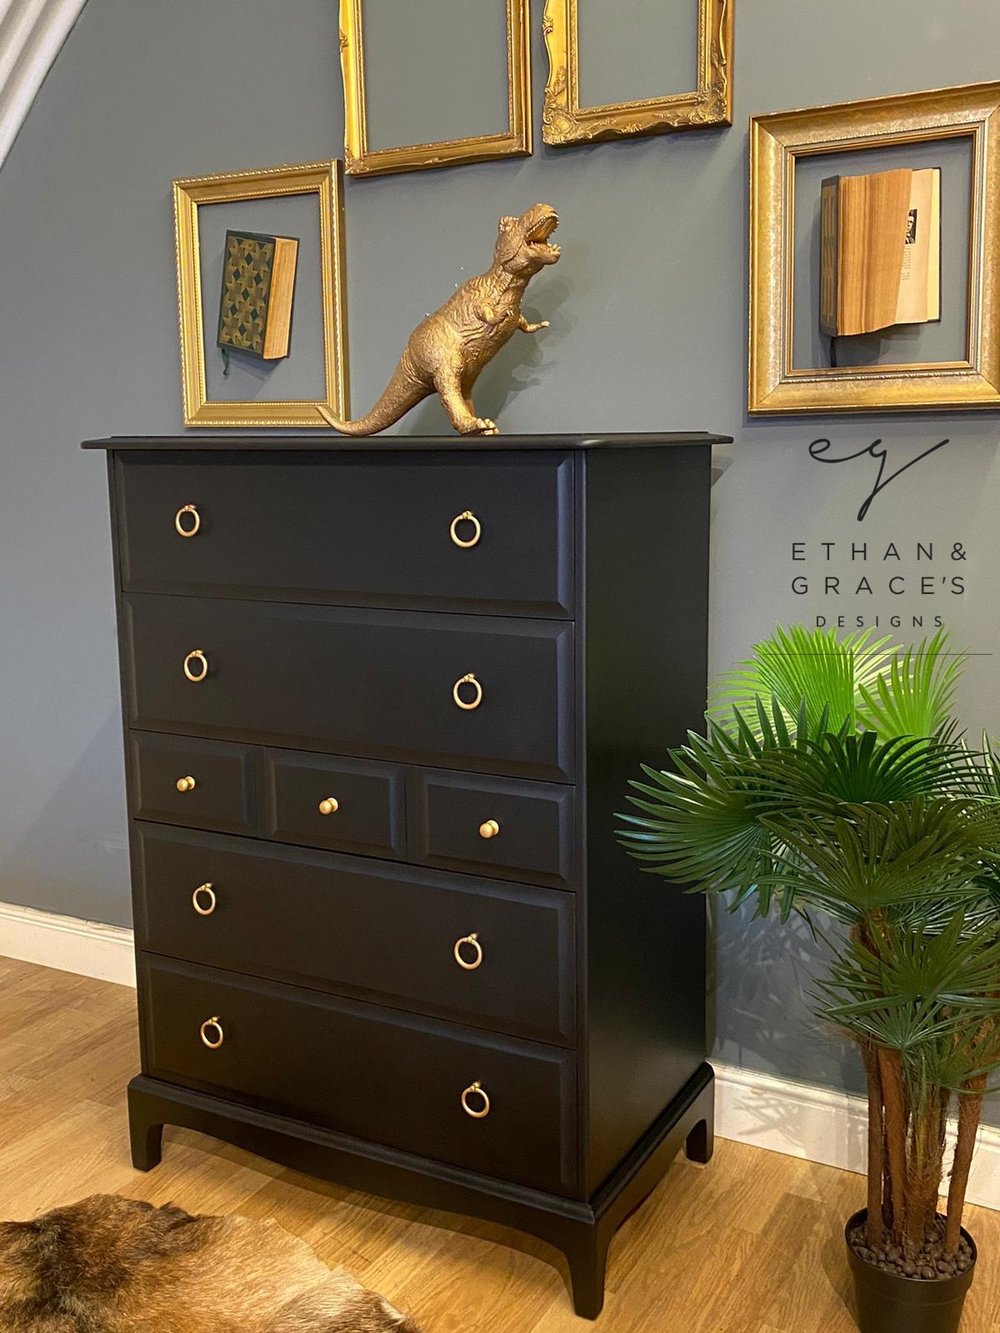 Image of Stag tallboy chest of drawers in black.